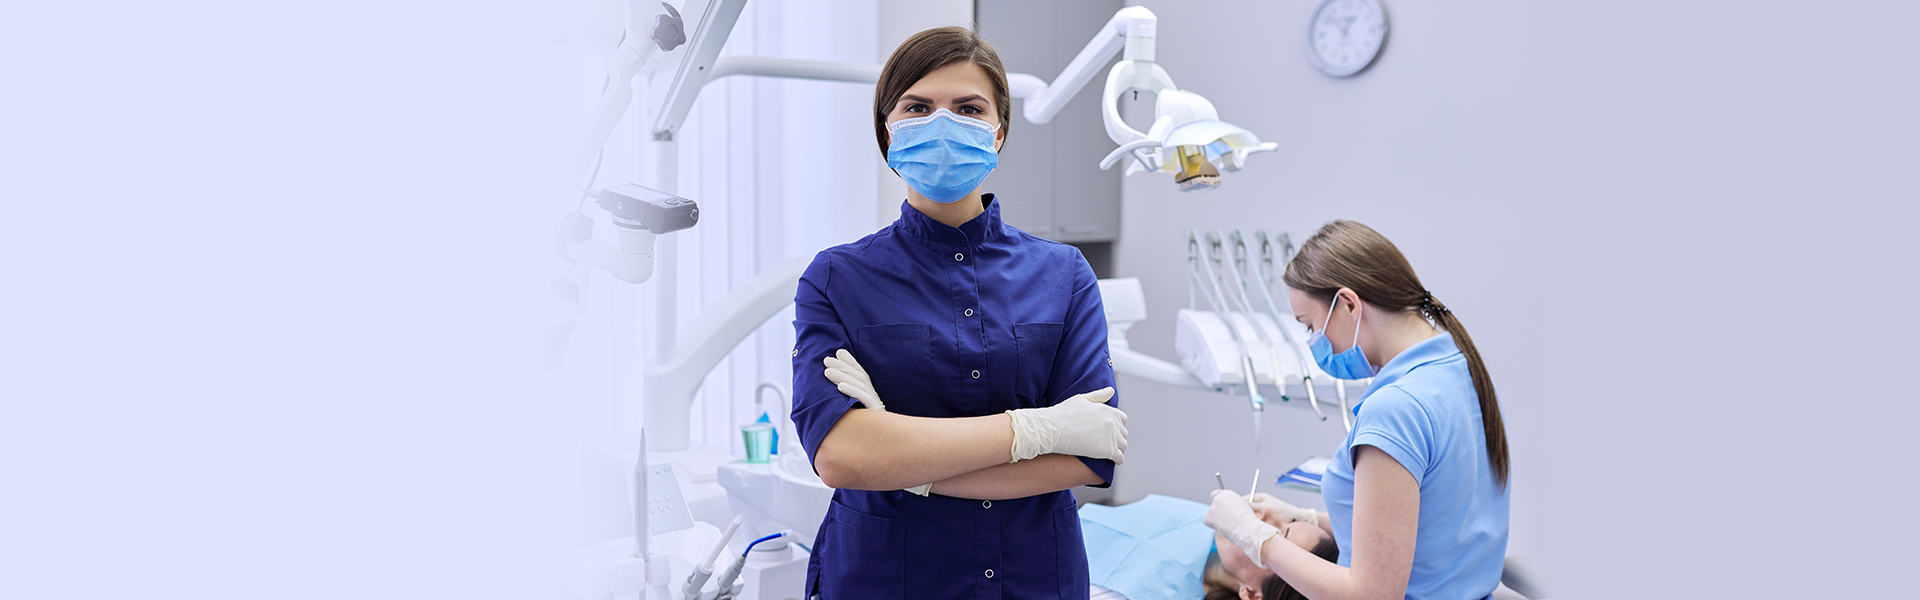 How to Find a Dentist Who Understands Your Dental Fears and Anxiety 